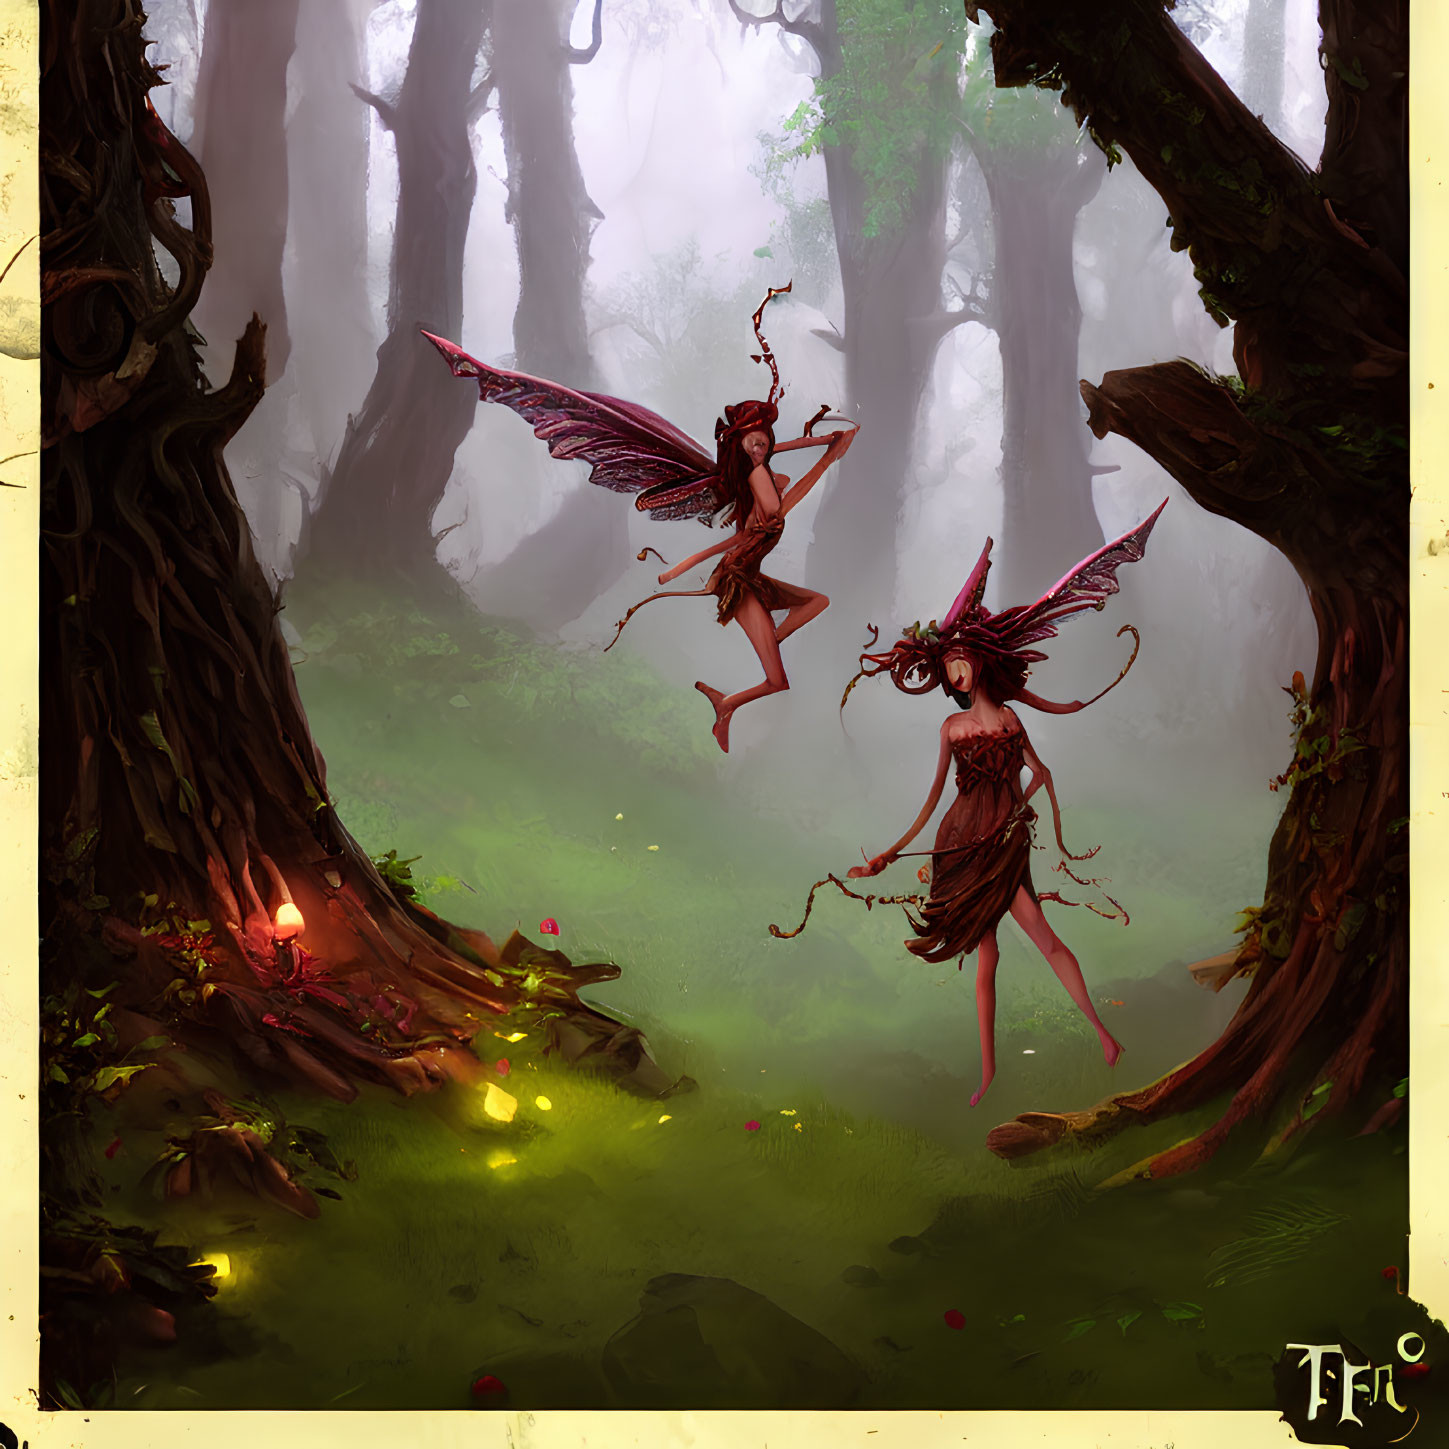 Whimsical fairies dancing in misty forest with intricate wings